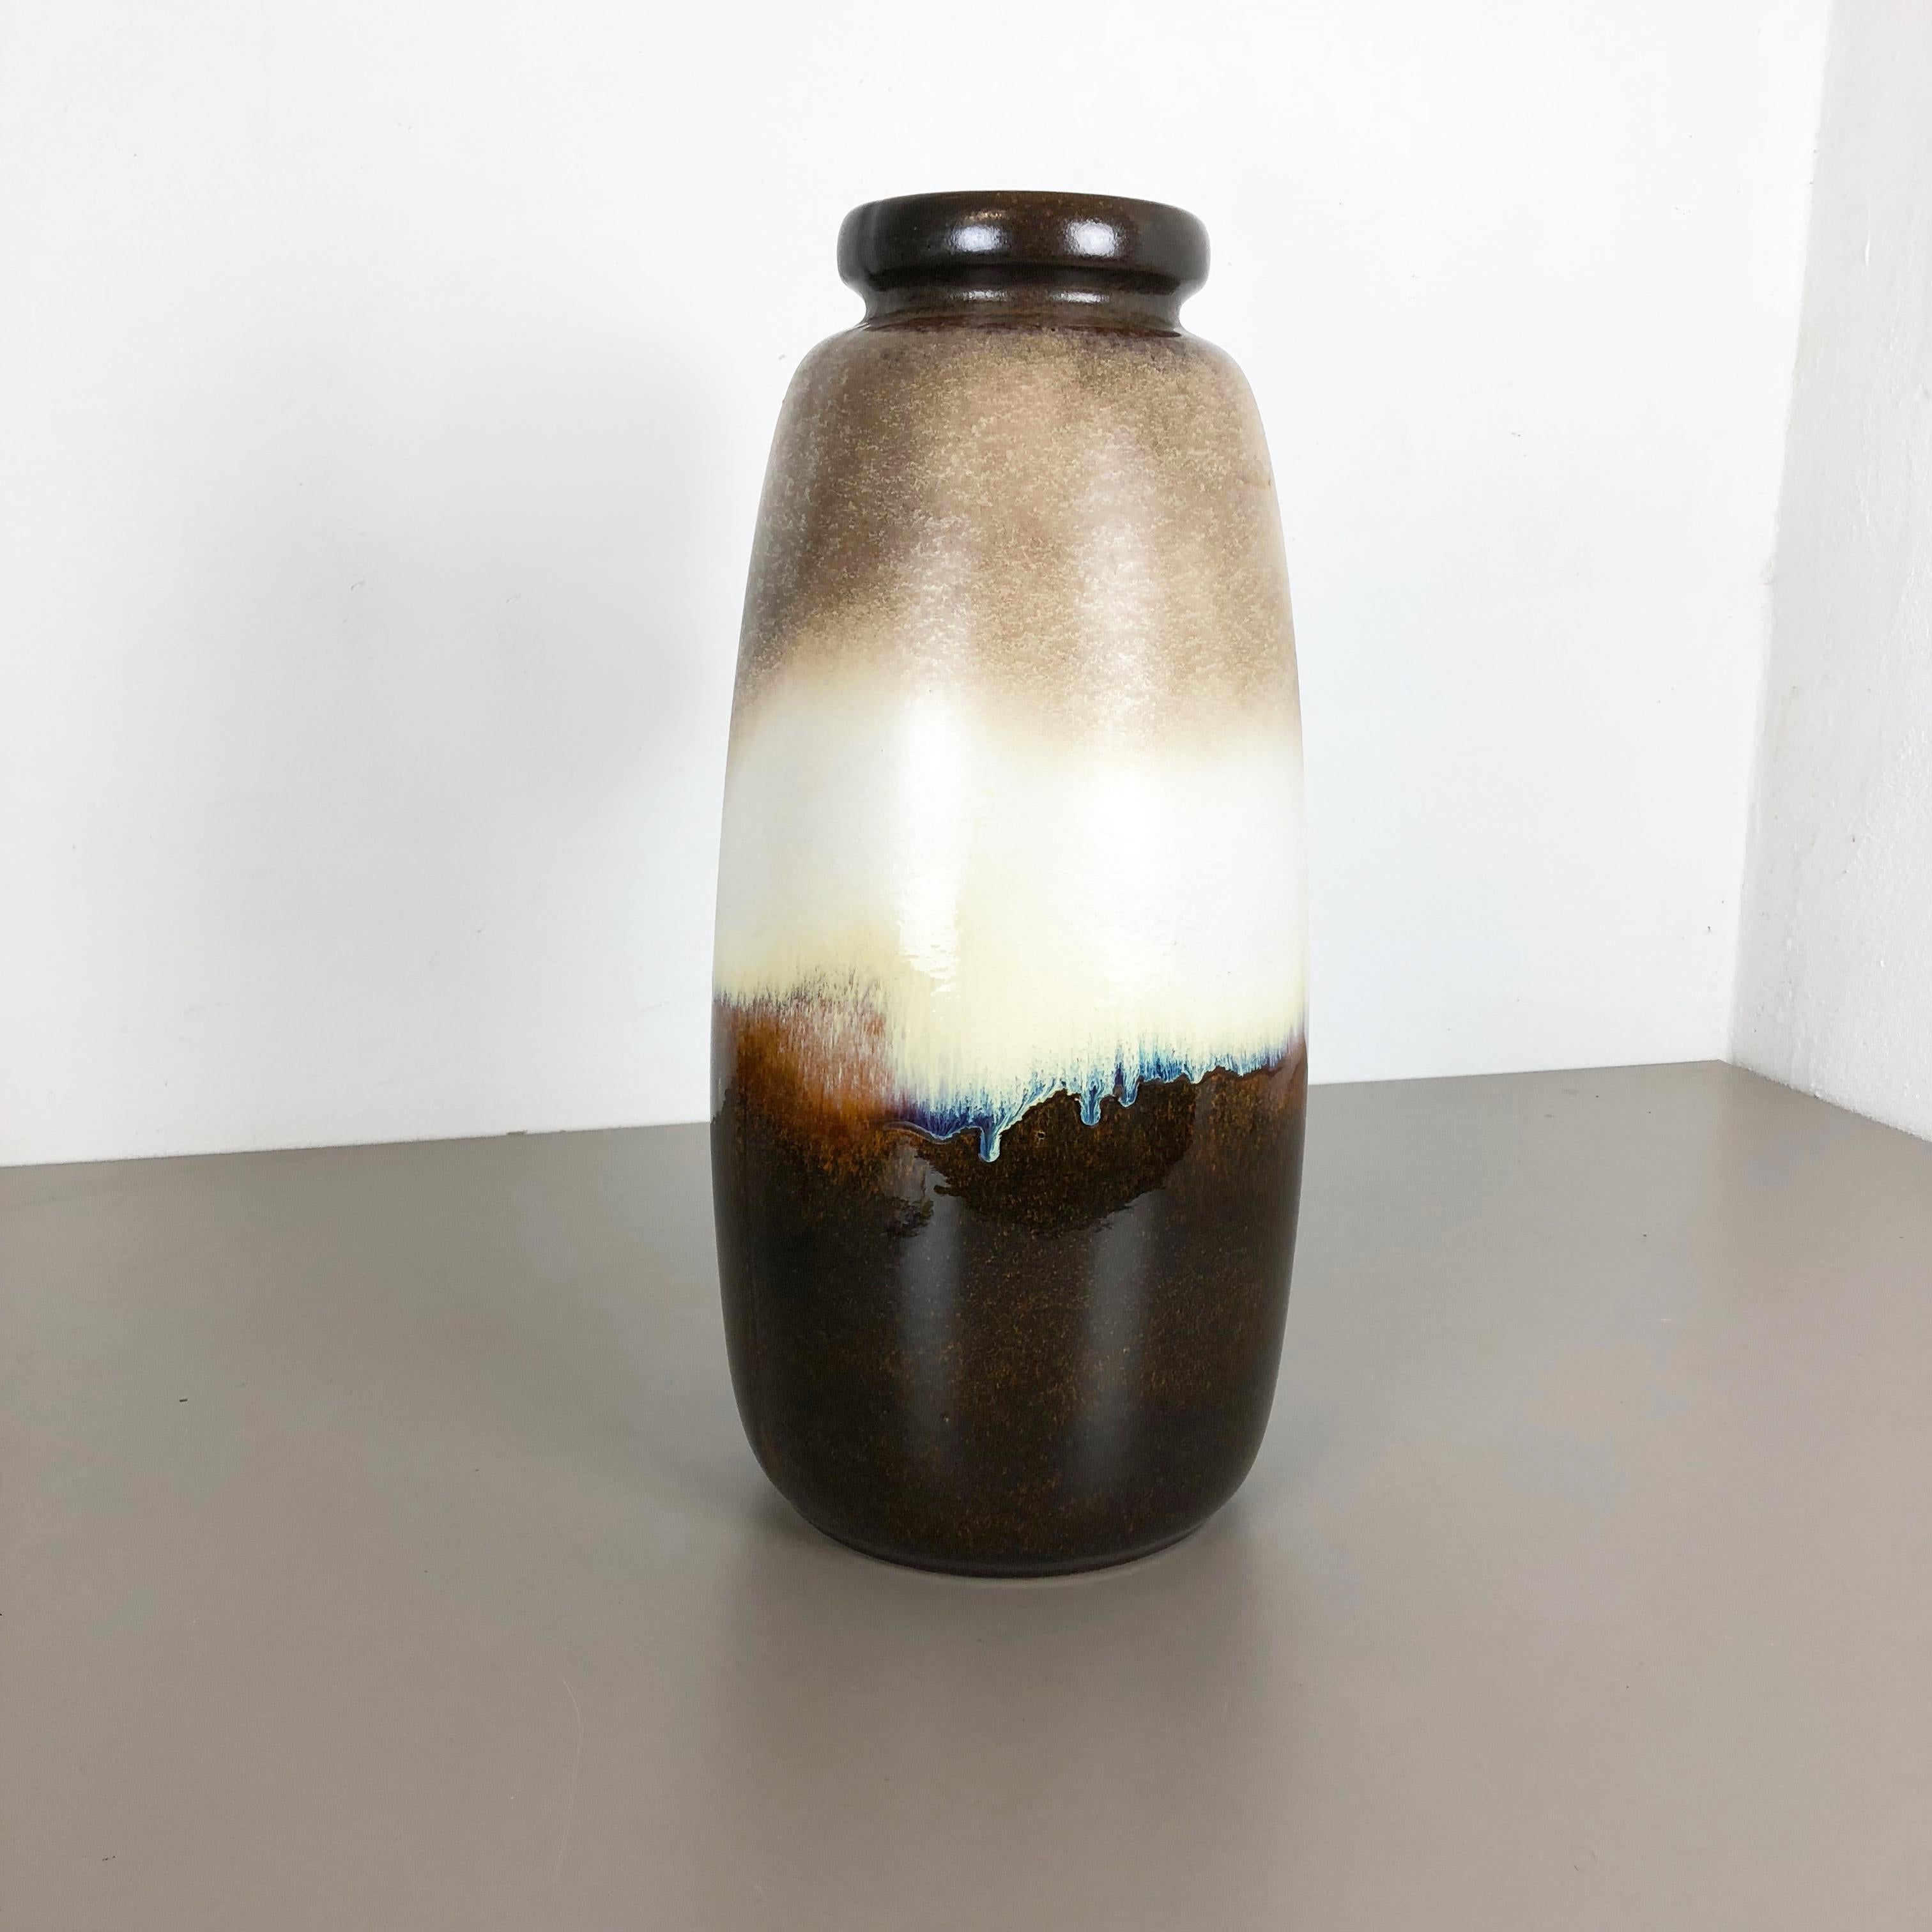 Article:

Fat lava art vase XXXL version


Model: 284-47


Producer:

Scheurich, Germany



Decade:

1970s


Description:

This original vintage vase was produced in the 1970s in Germany. it is made of ceramic pottery in fat